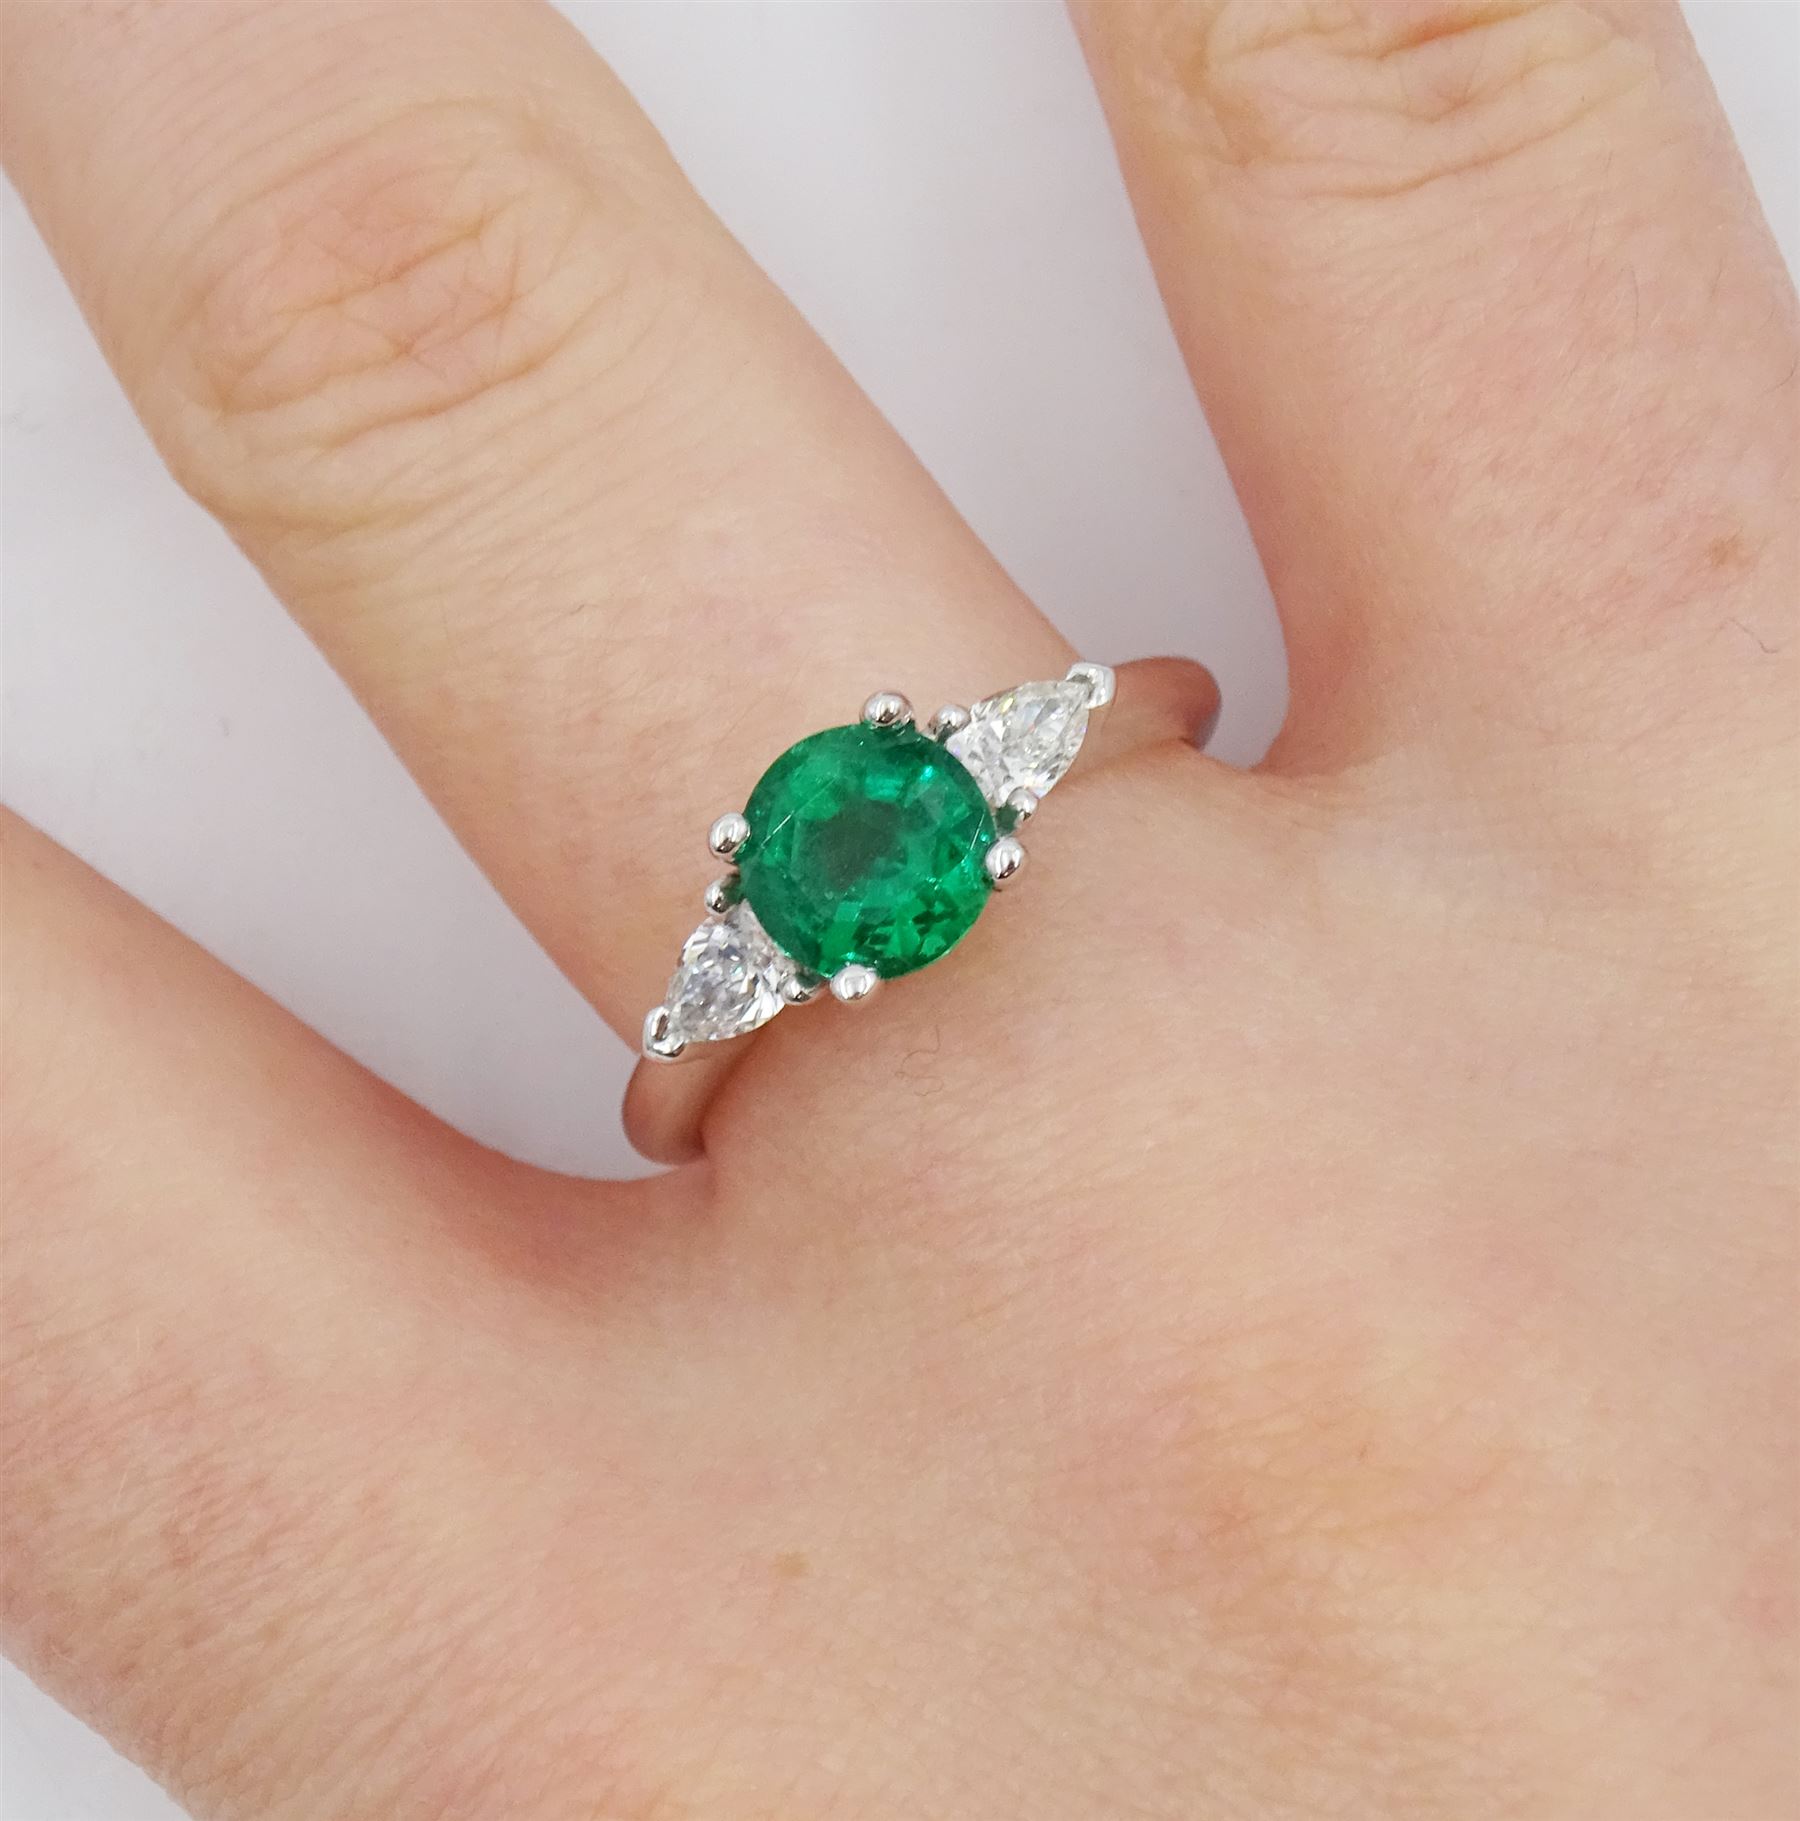 18ct white gold three stone round emerald and pear shaped diamond ring - Image 2 of 4